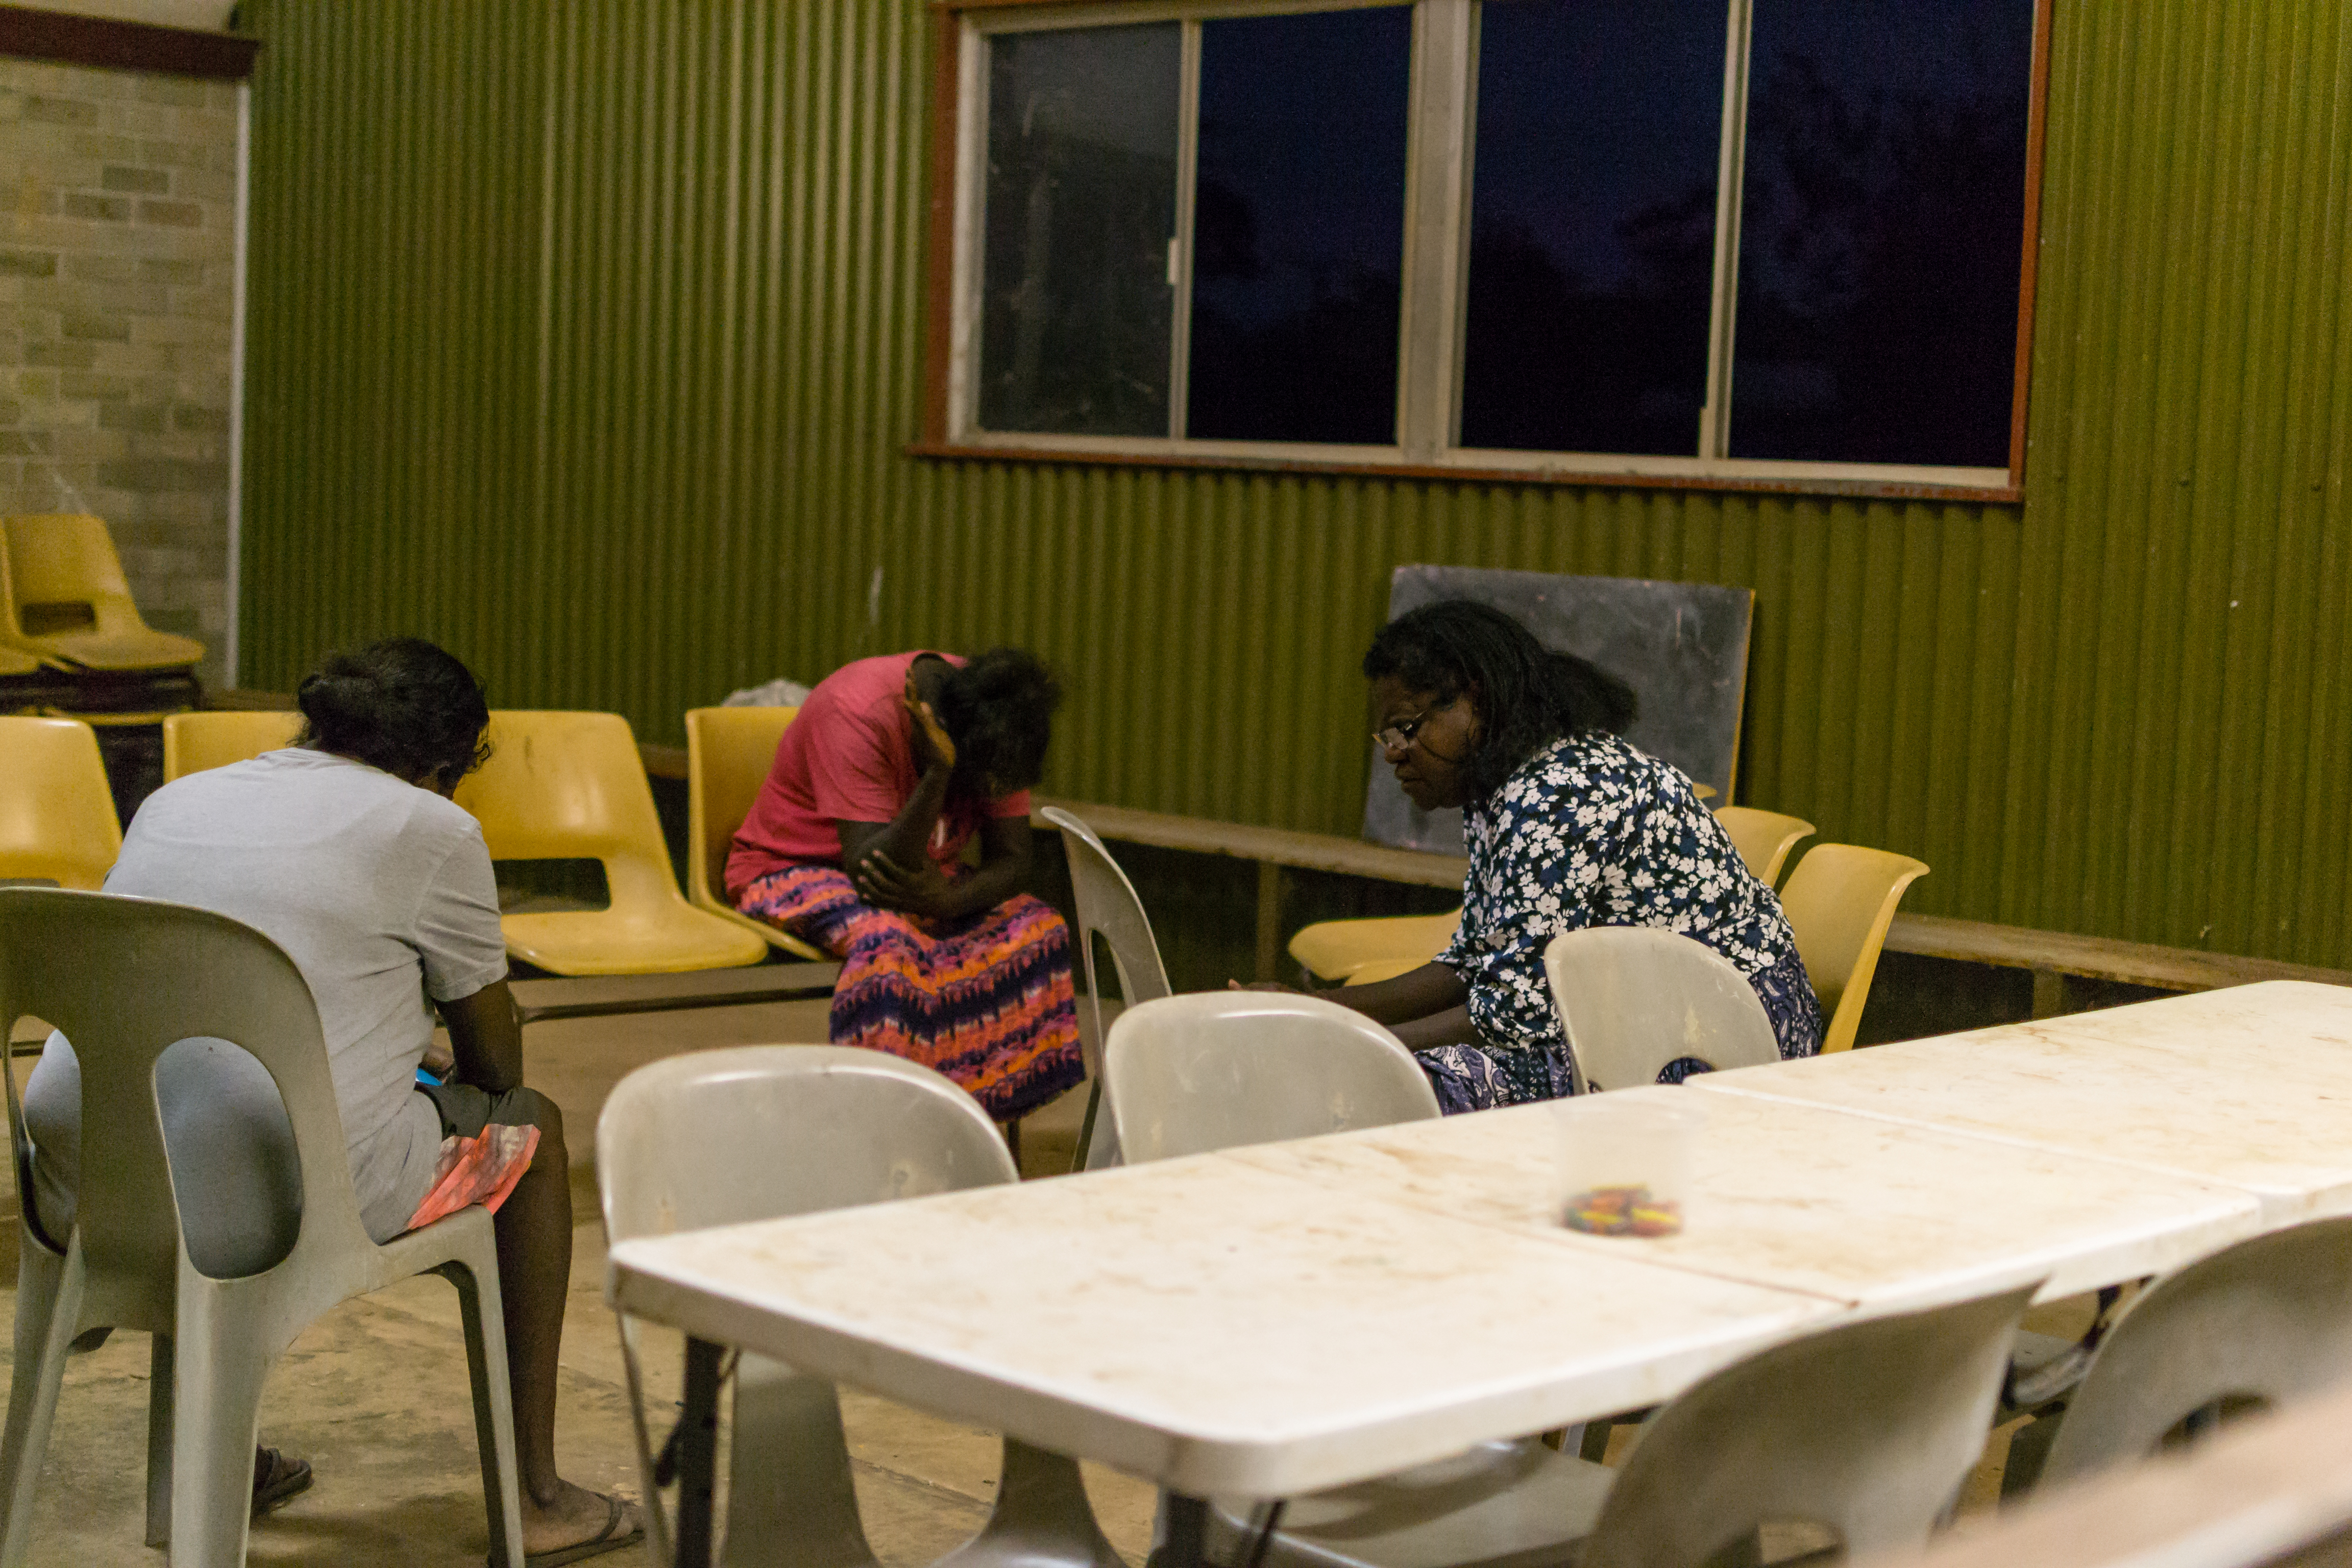 Women in the community pray for the kids while they attend Kids Club, Barunga